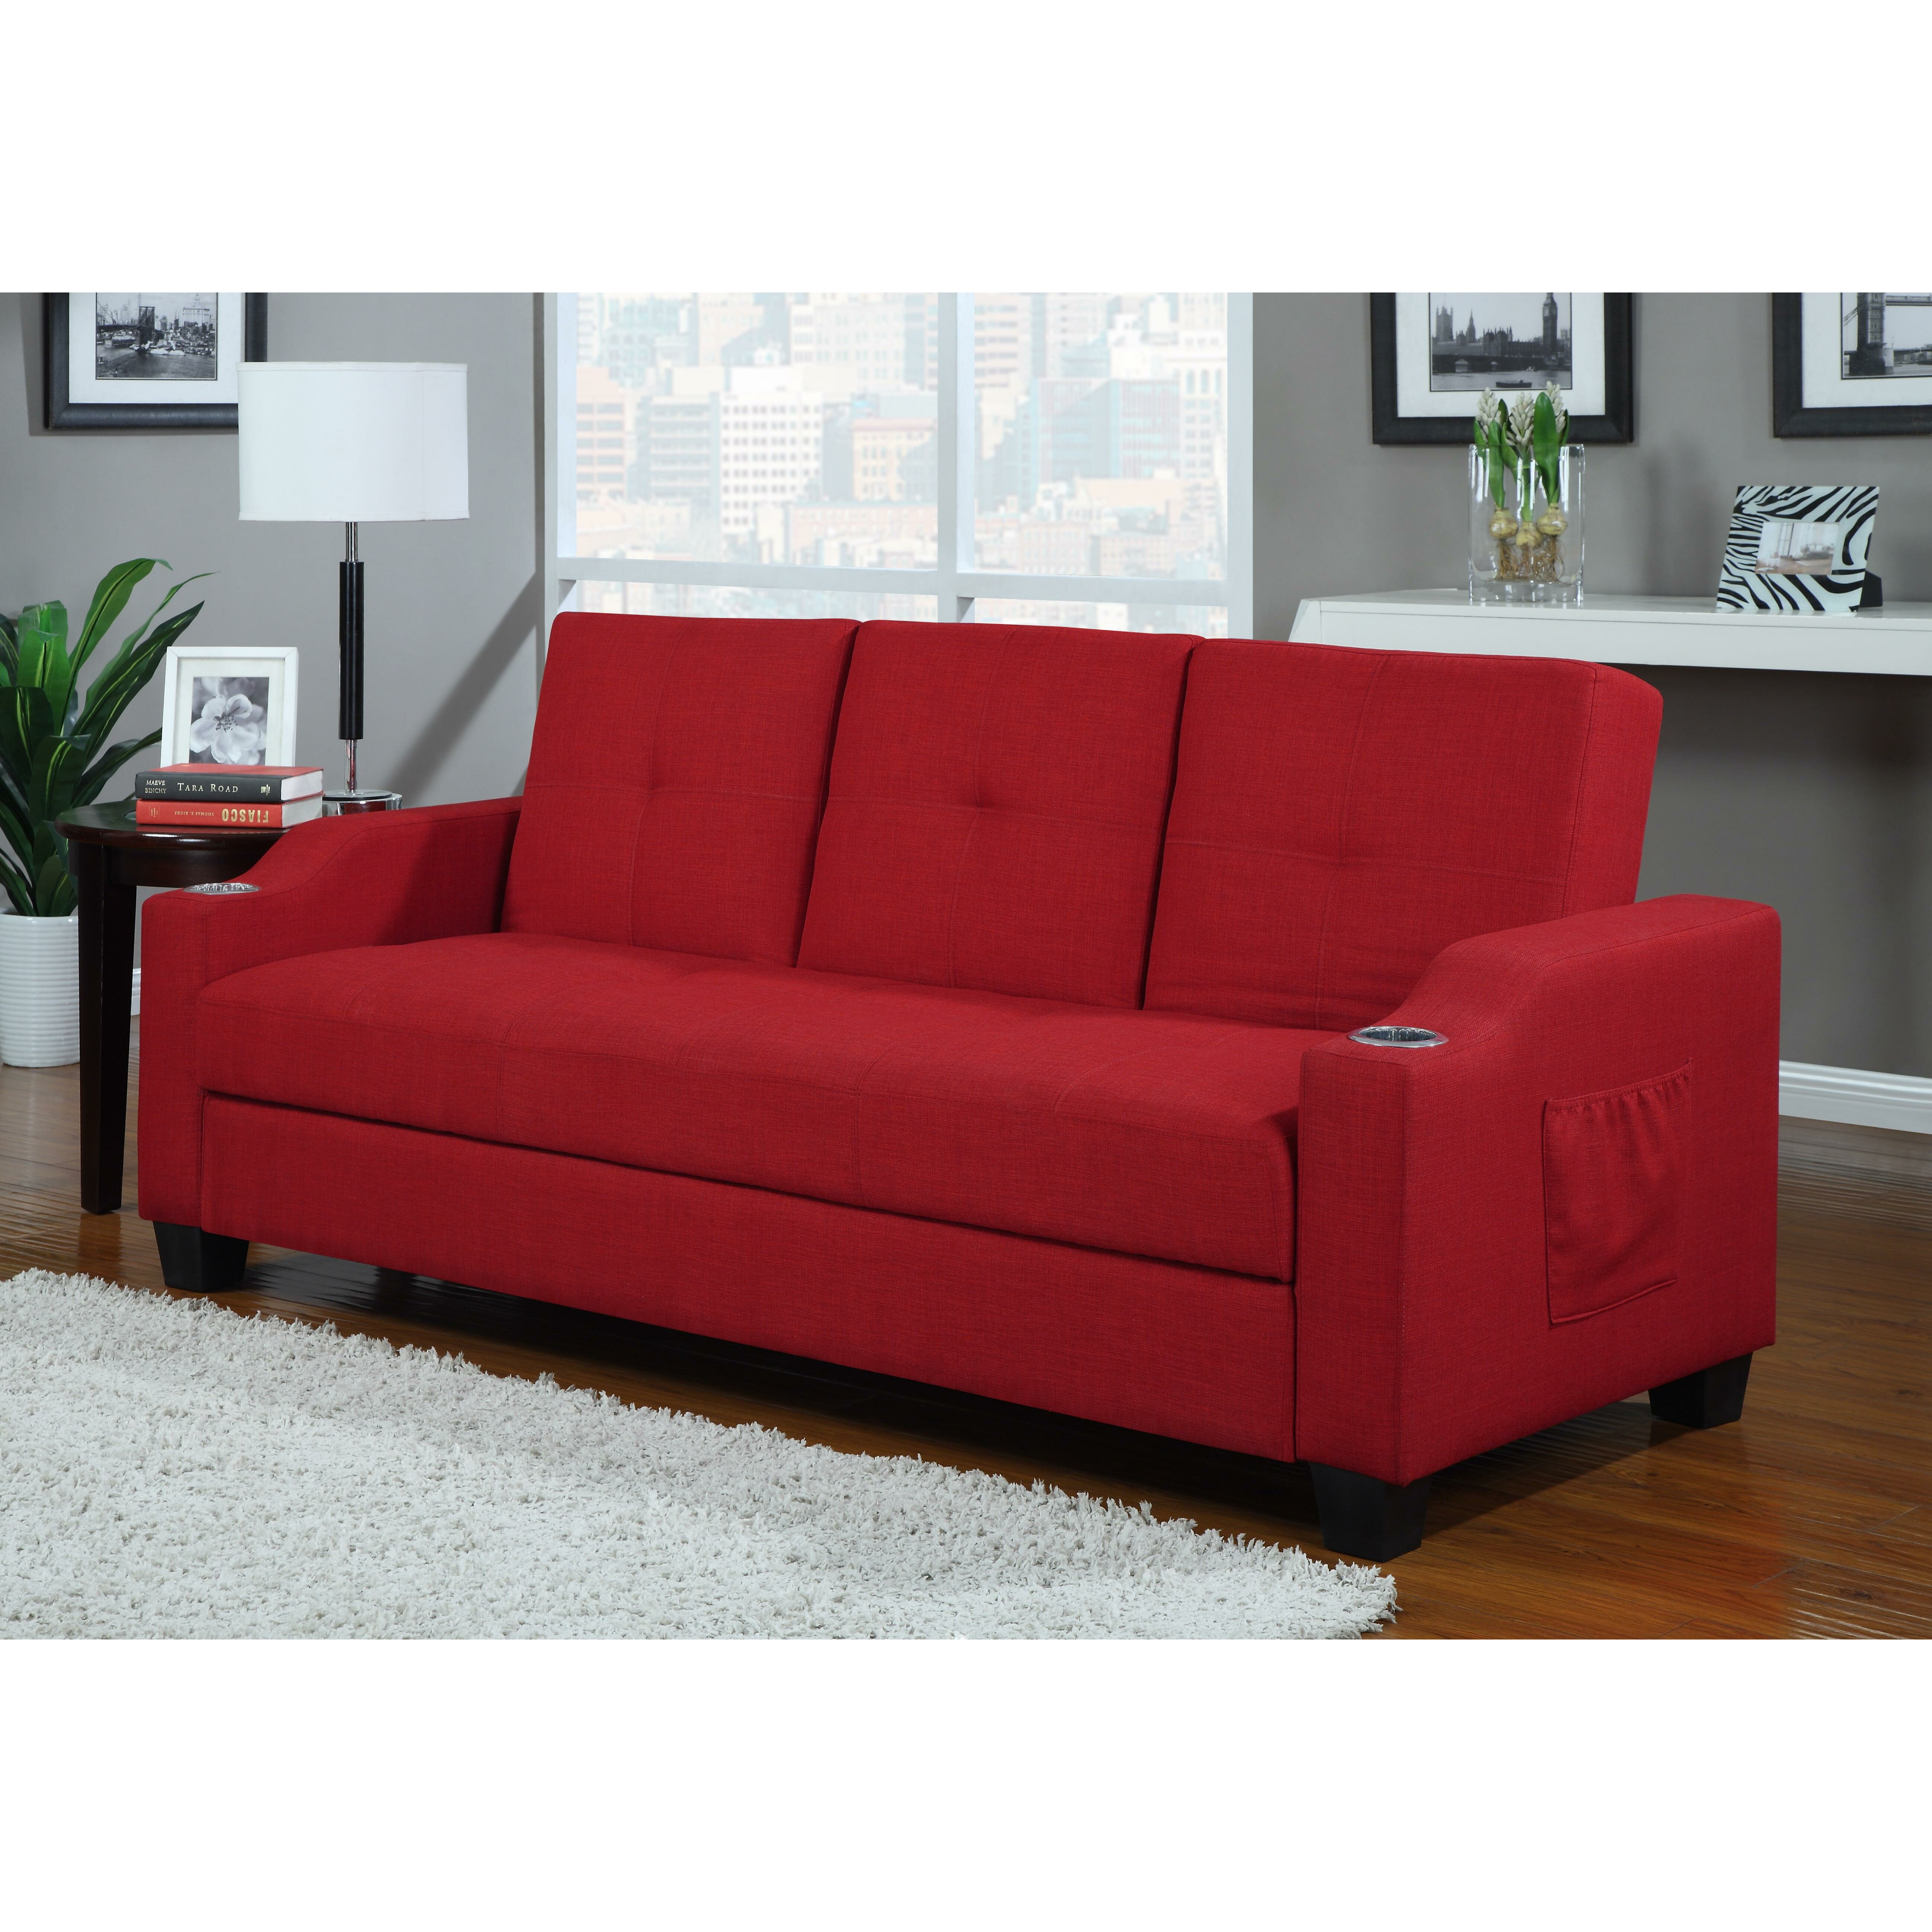 New Kathy Ireland Living Room Furniture for Simple Design